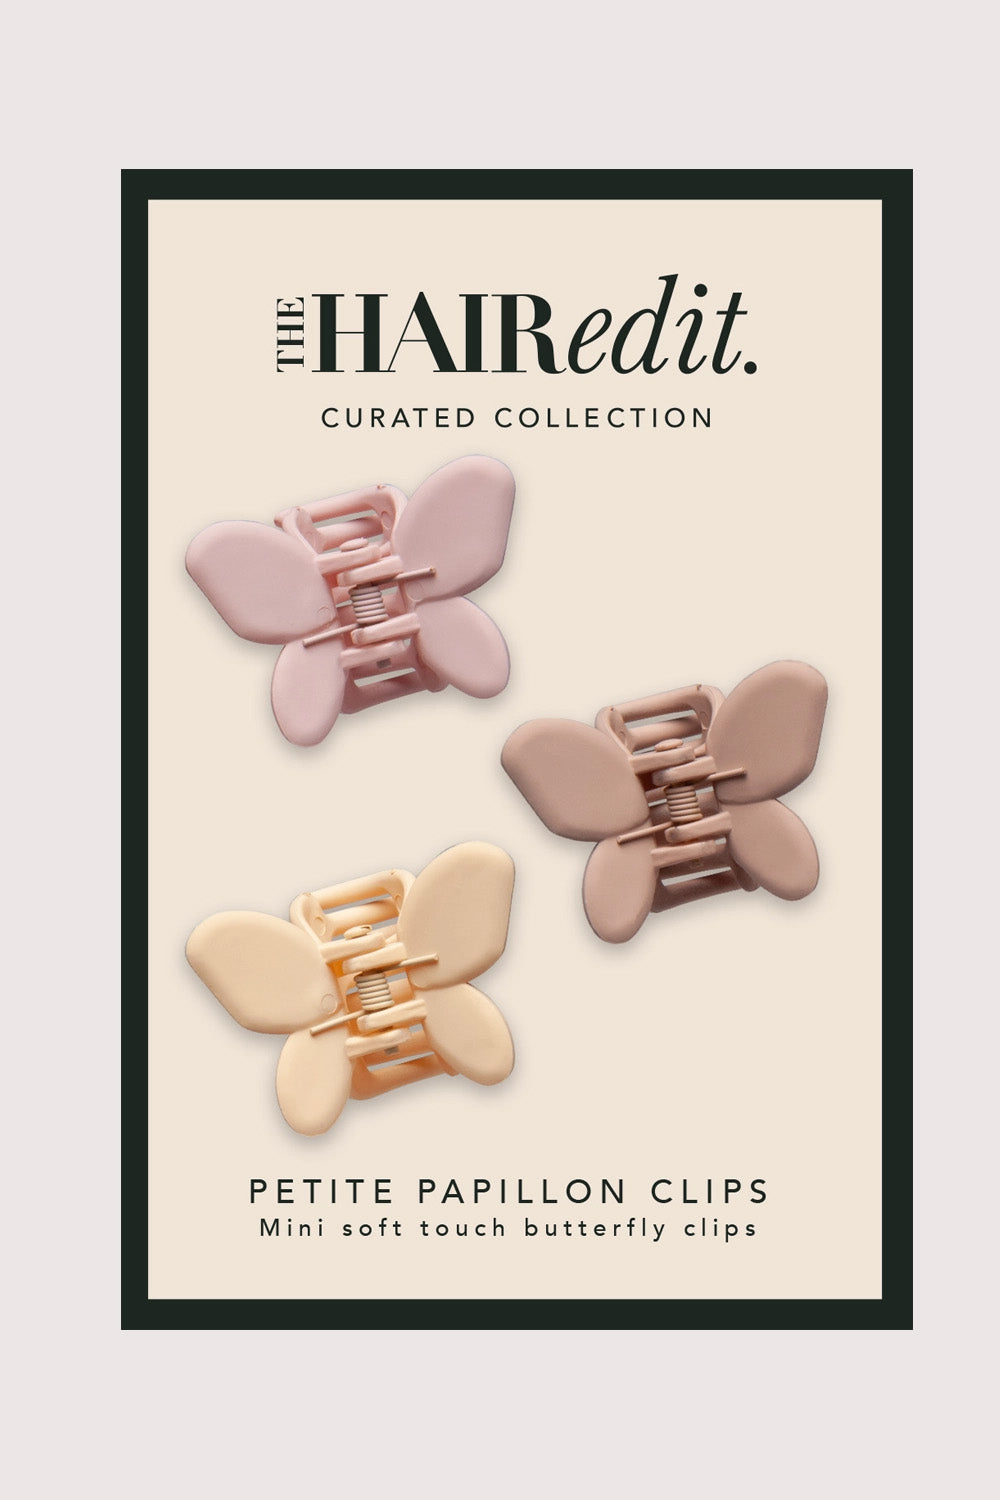 the hair edit mini butterfly hair clips in packaging